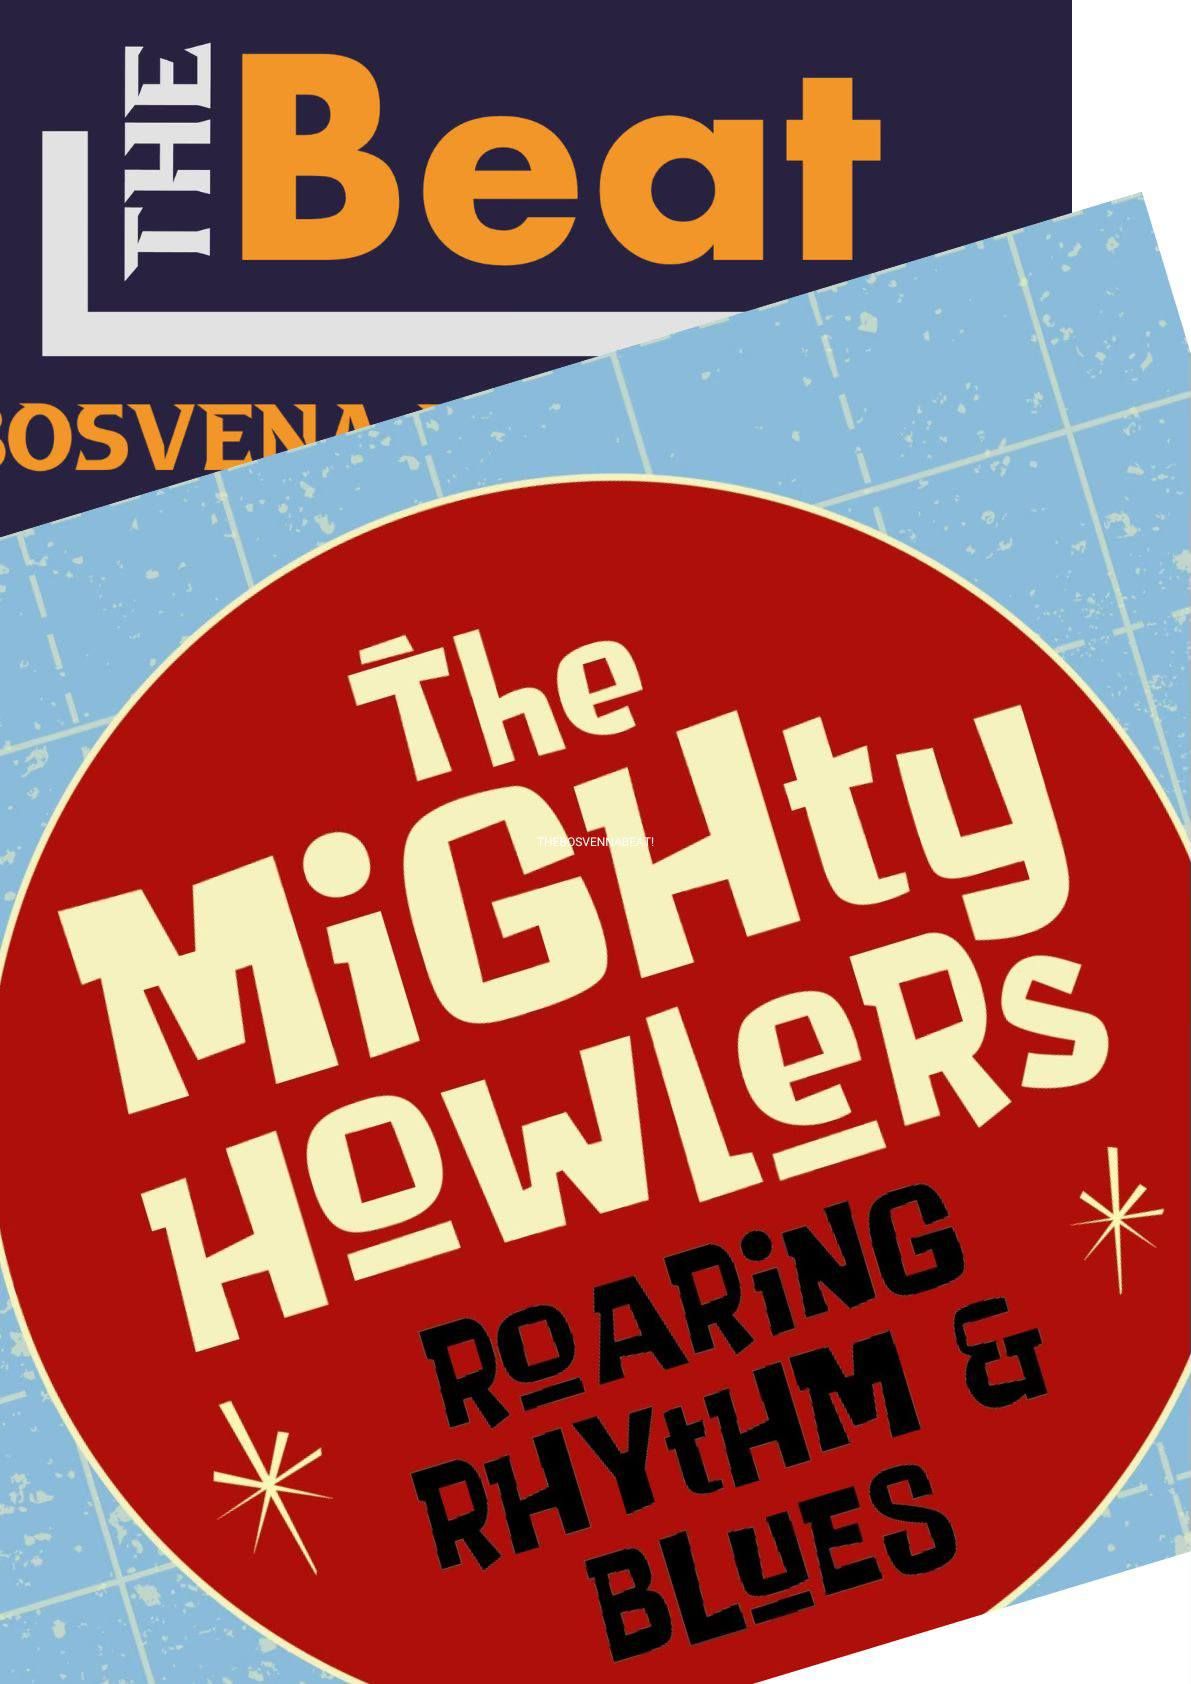 The Mighty Howlers